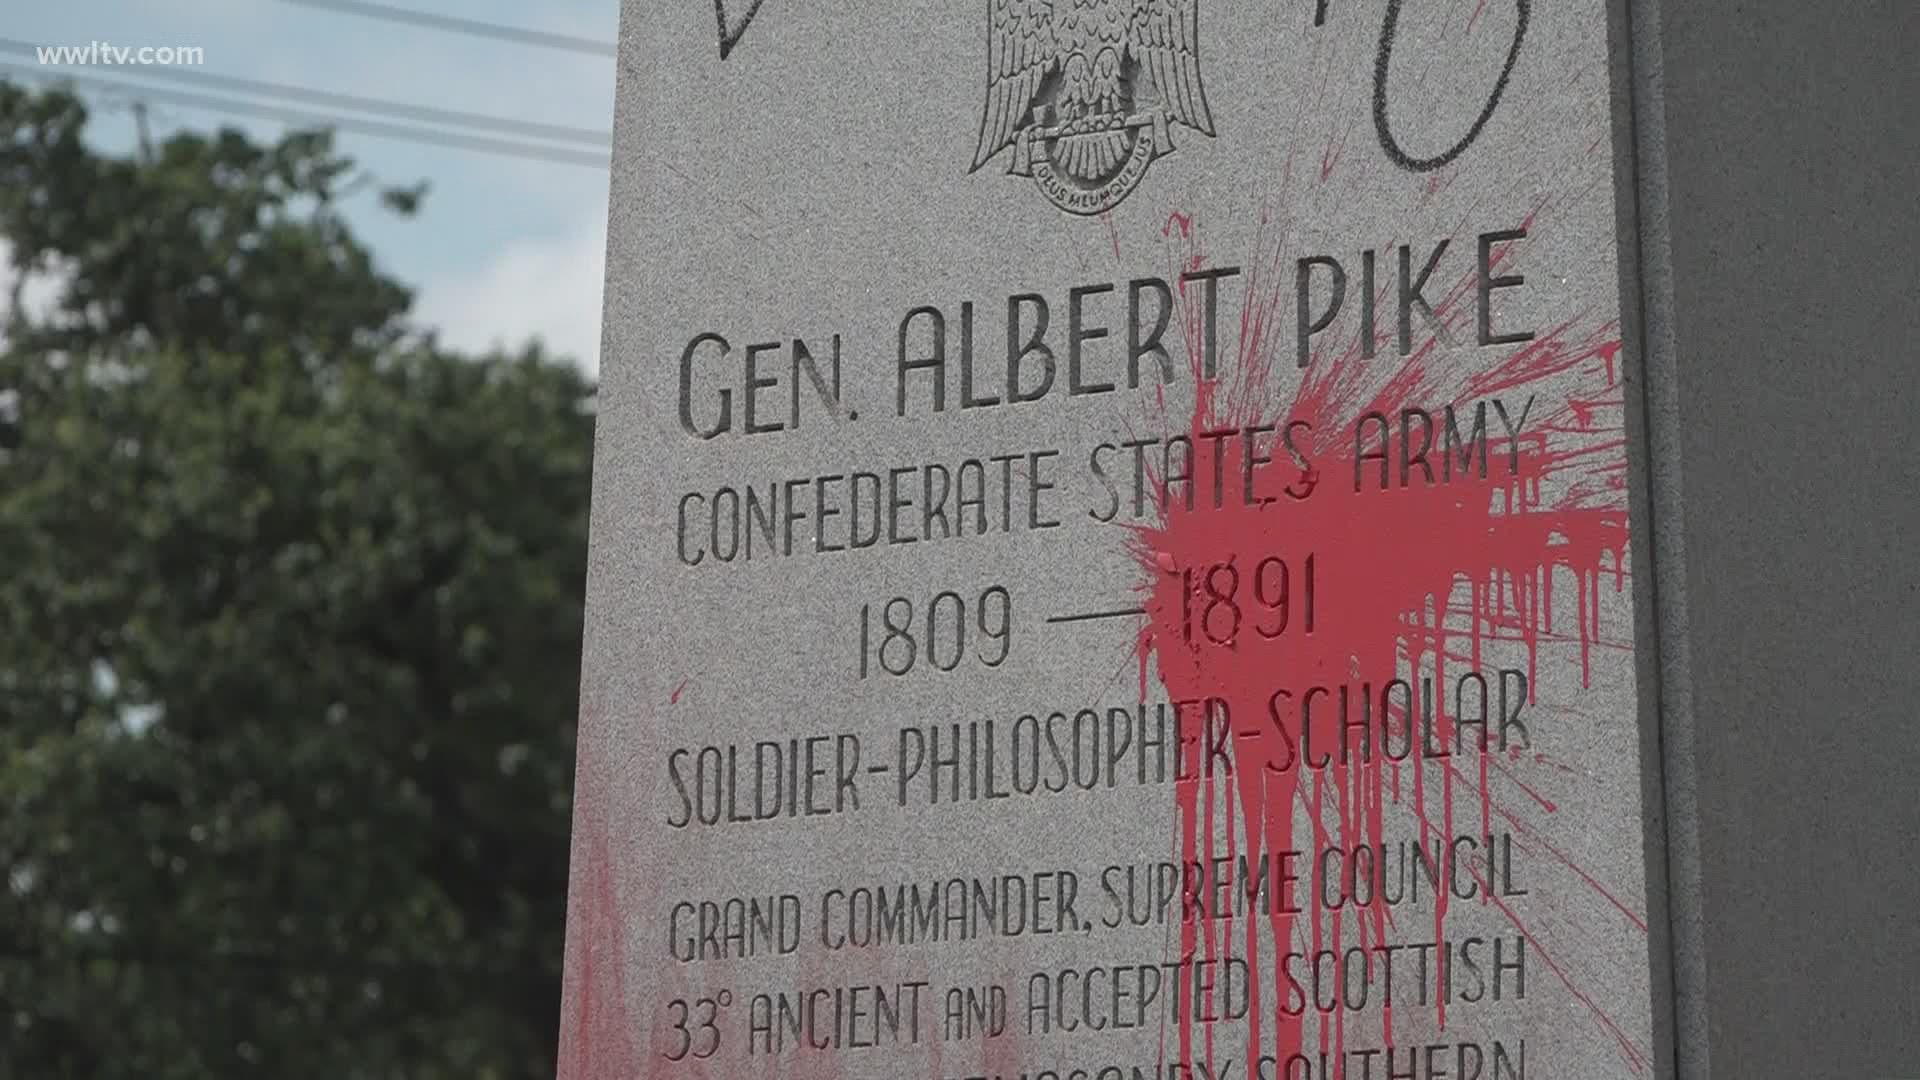 Four statues in New Orleans were either defaced or partially toppled in the last day or so.